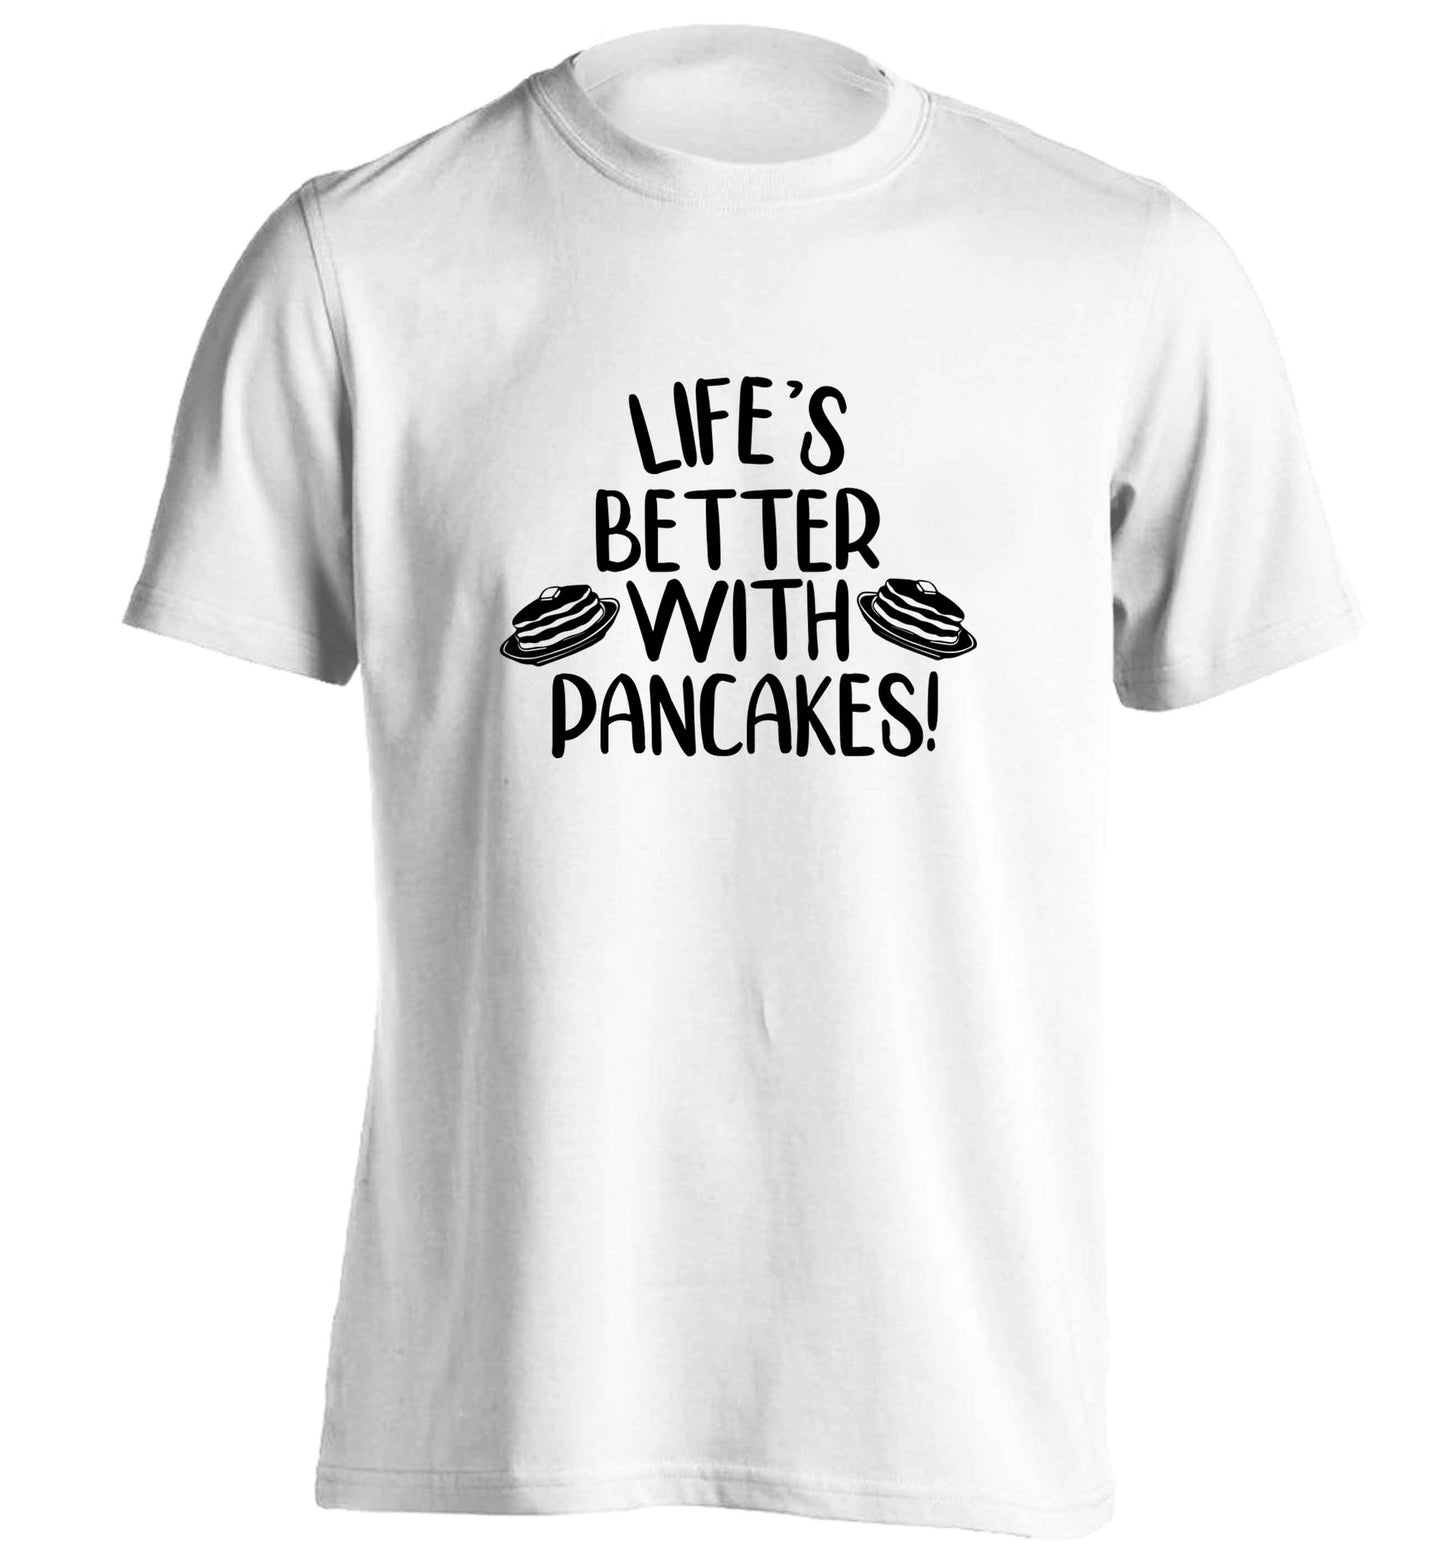 Life's better with pancakes adults unisex white Tshirt 2XL